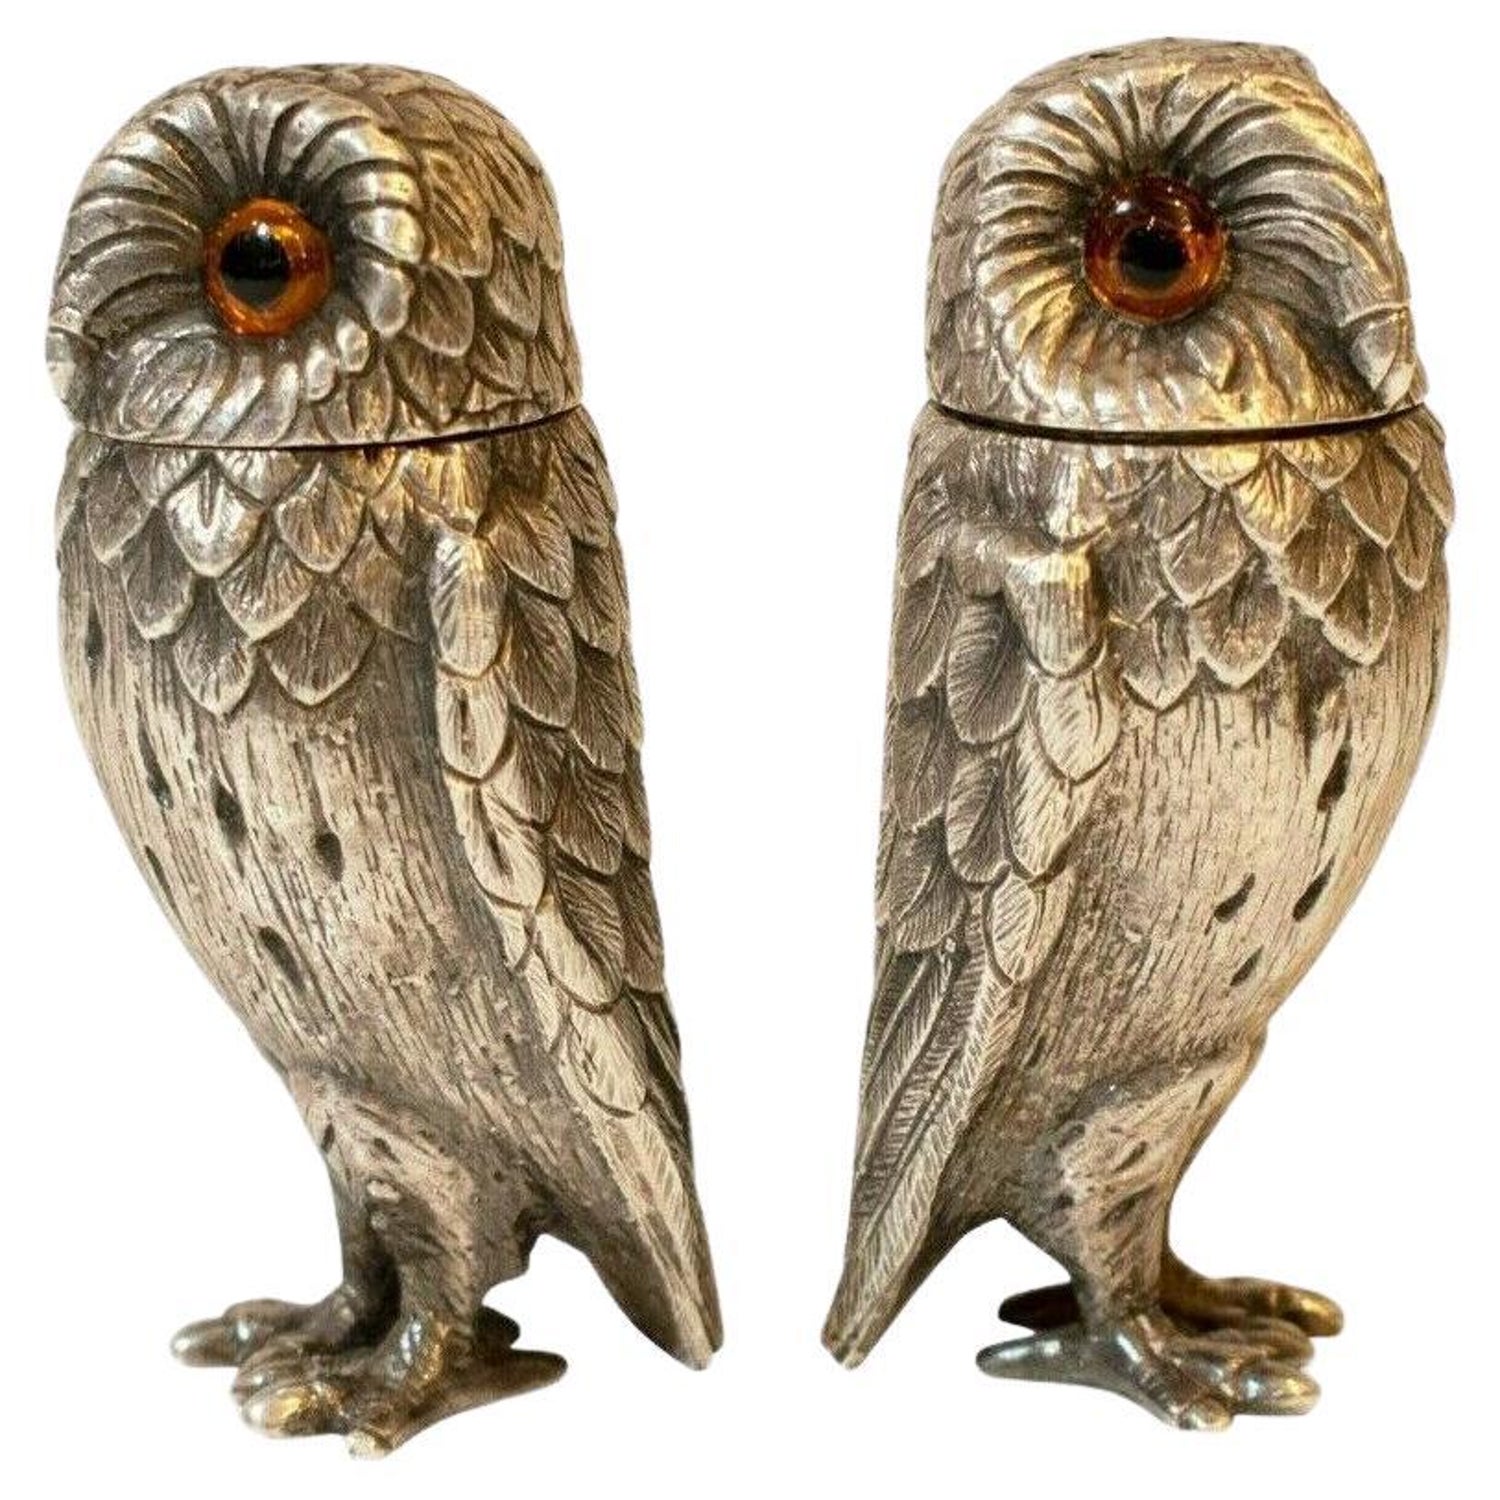 Solid Silver Owl Salt And Pepper Shakers Richard Comins London 1970 S For Sale At 1stdibs